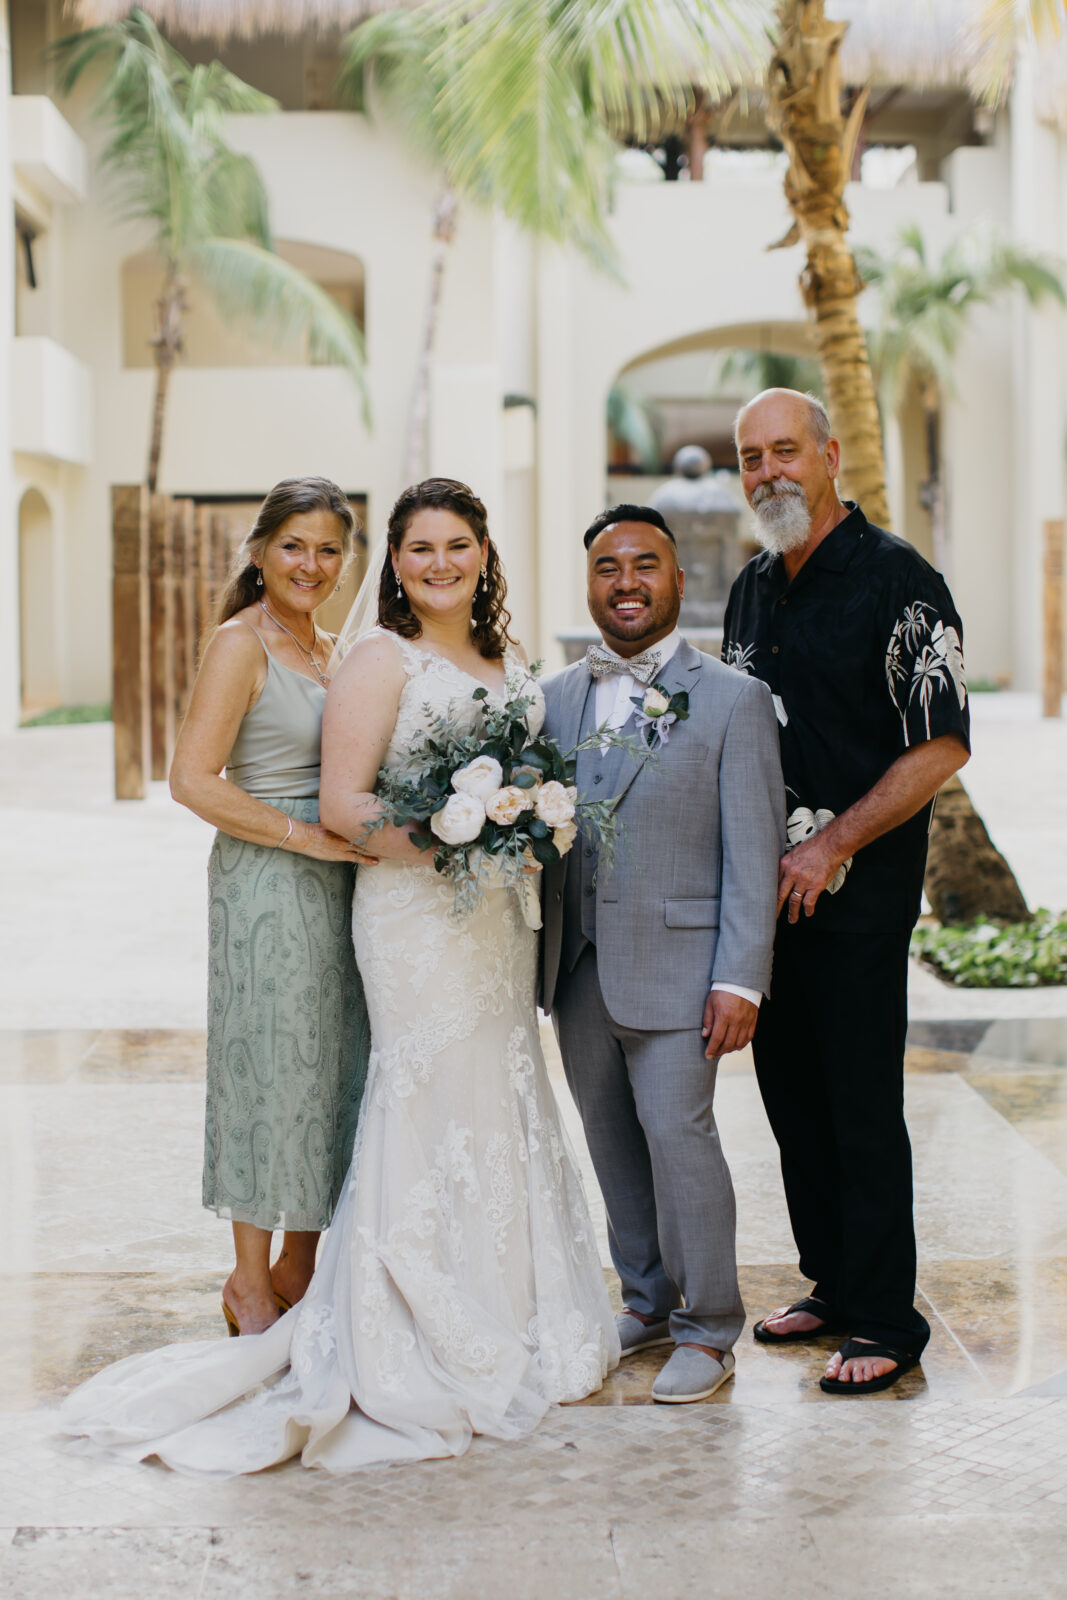 A photo of the wedding couple and the groom's parents